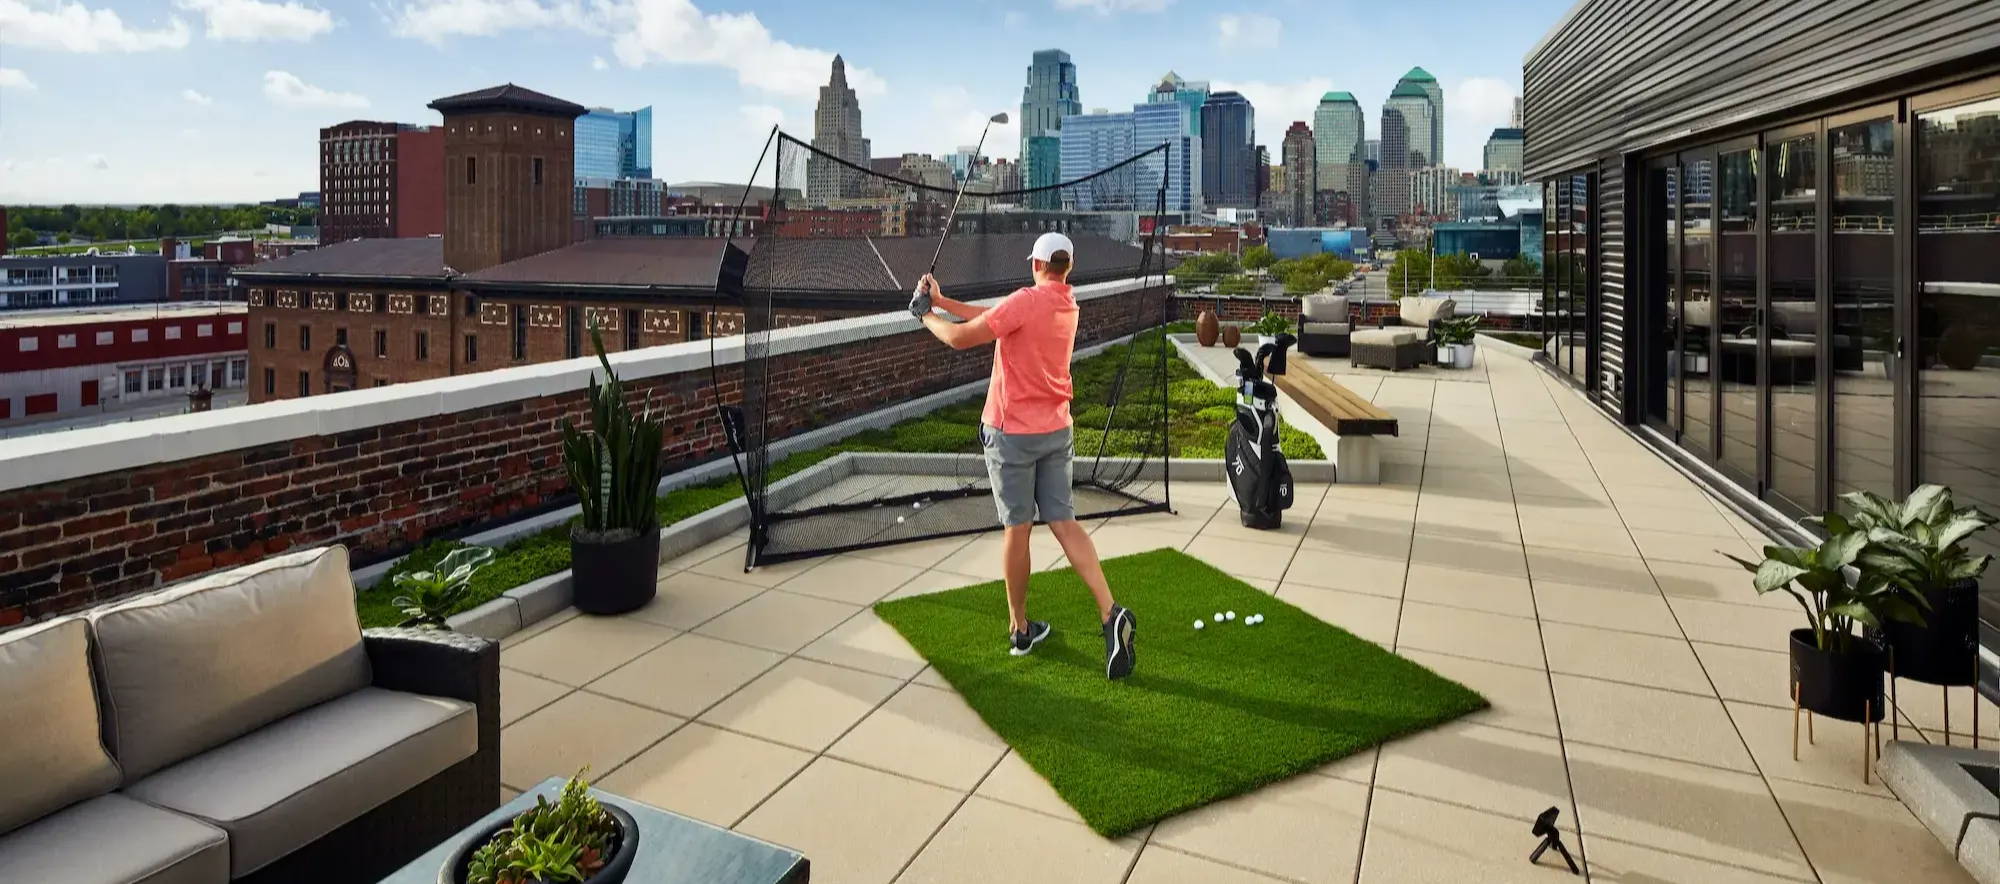 A golfer hitting balls into a practice net using a golf launch monitor on a rooftop